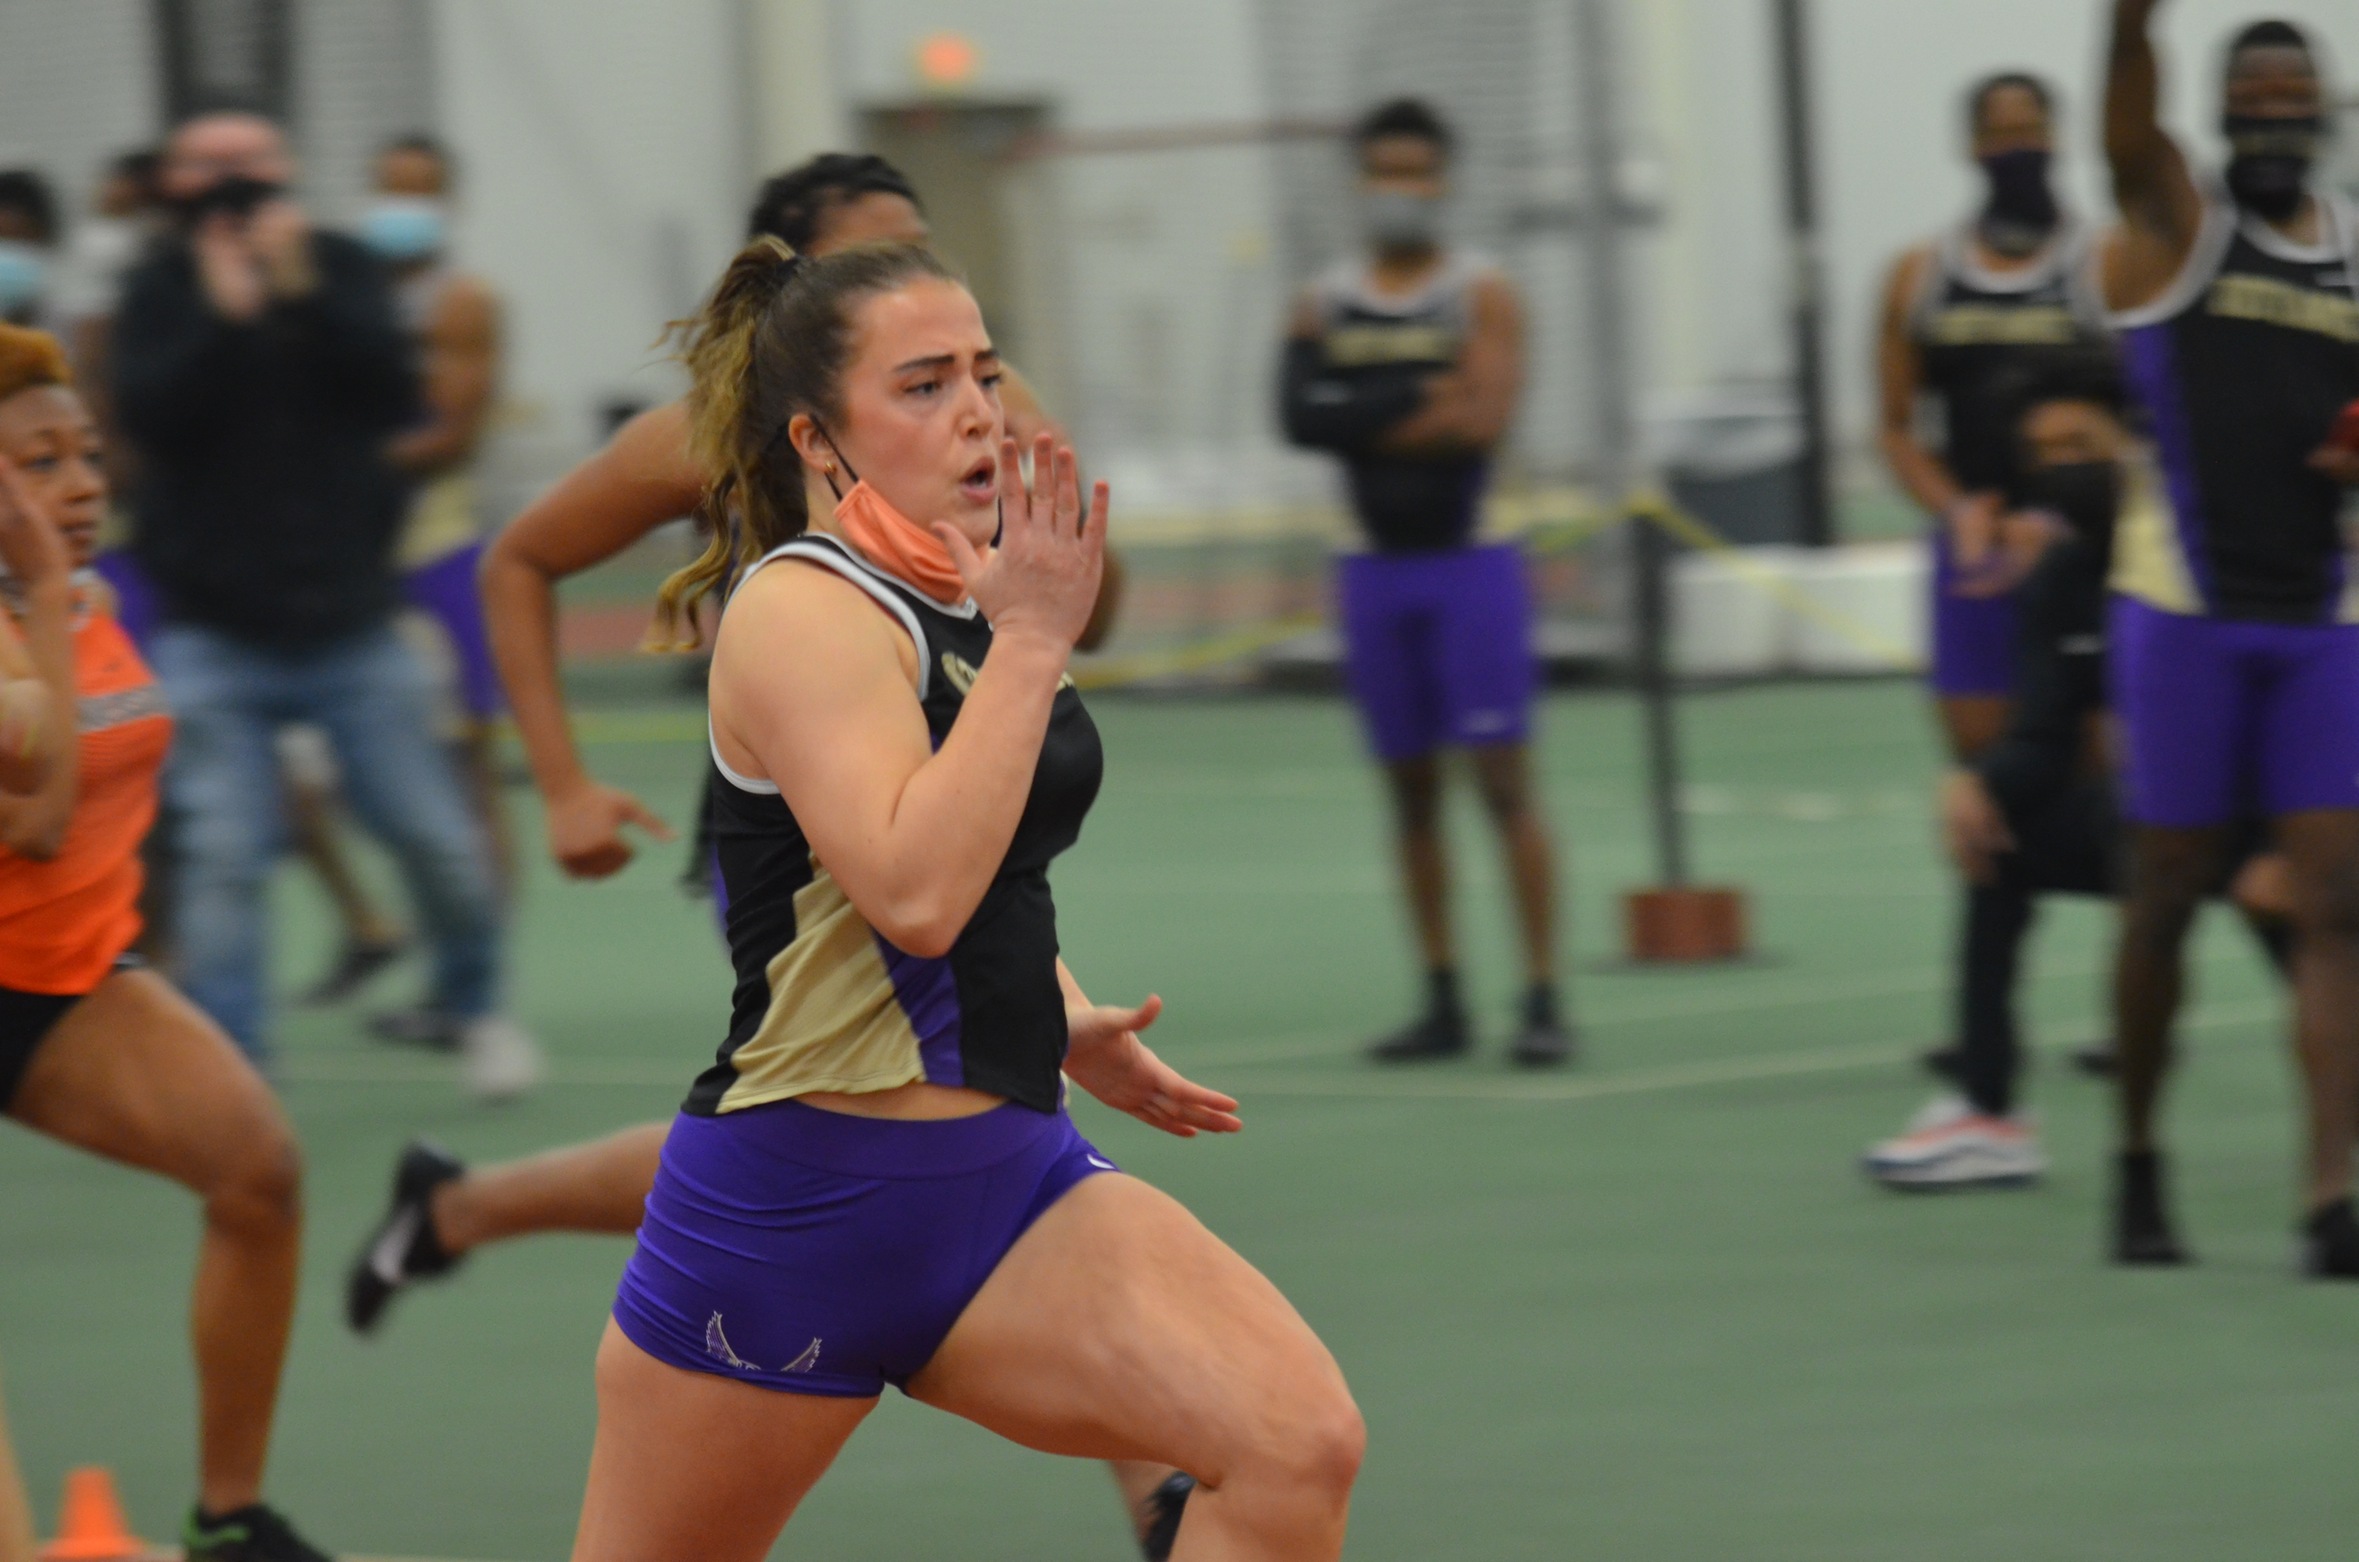 Track & Field begins season at Dave Meuleman Classic